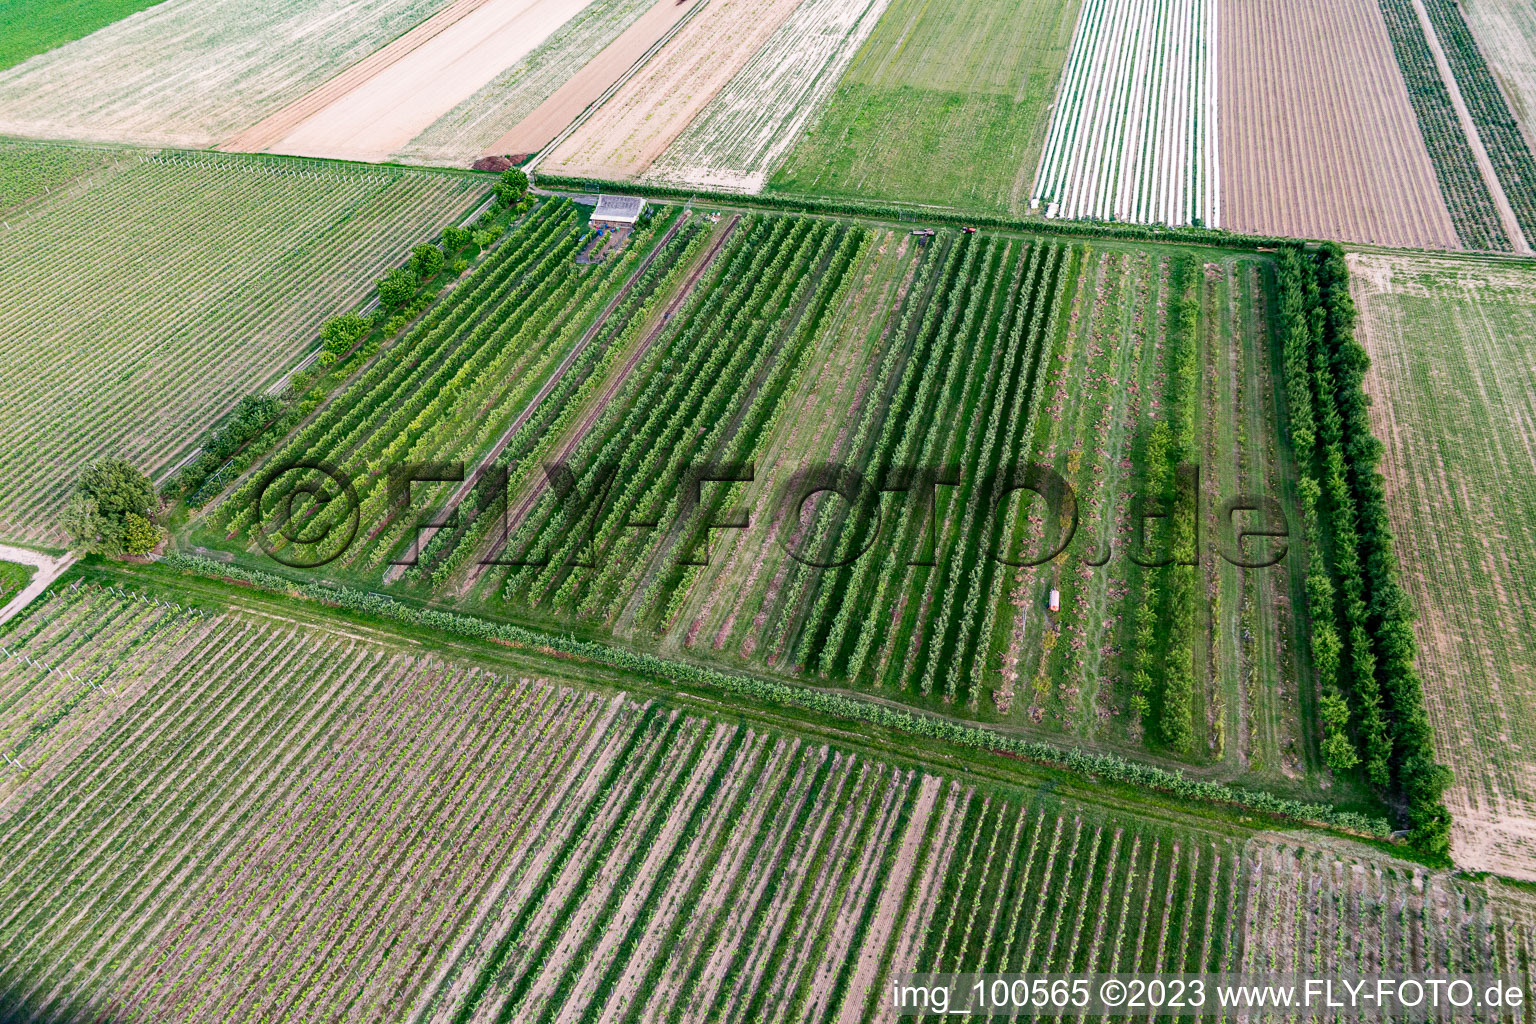 Eier-Meier's orchard in Winden in the state Rhineland-Palatinate, Germany seen from above